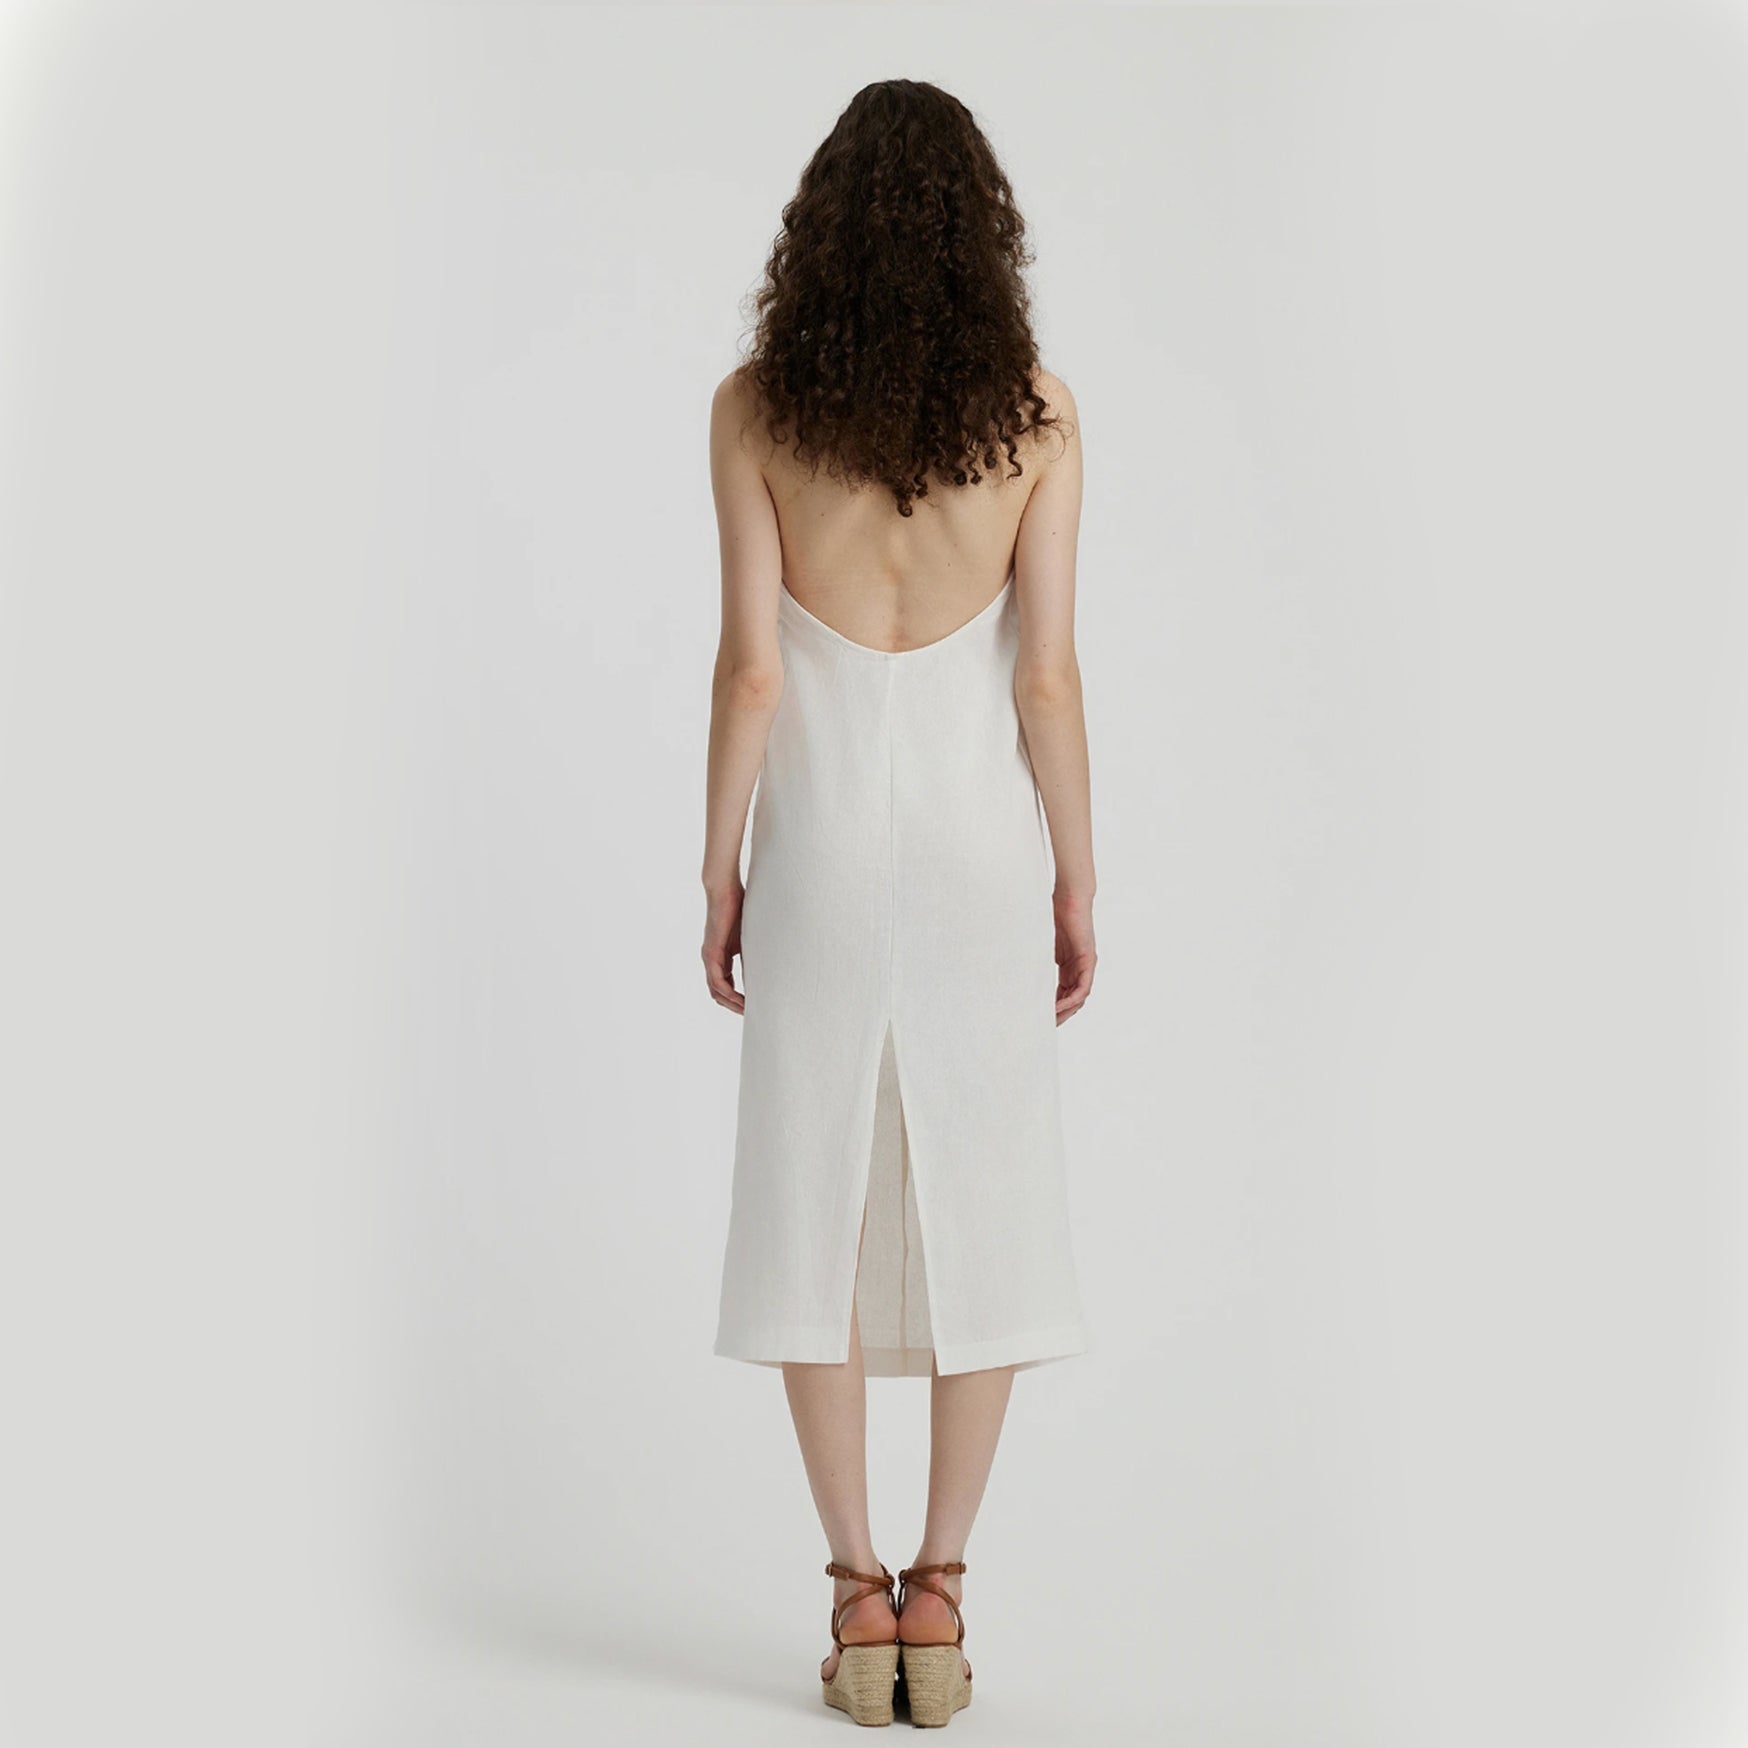 Open Back Halter Dress Without Chain Belt- White S